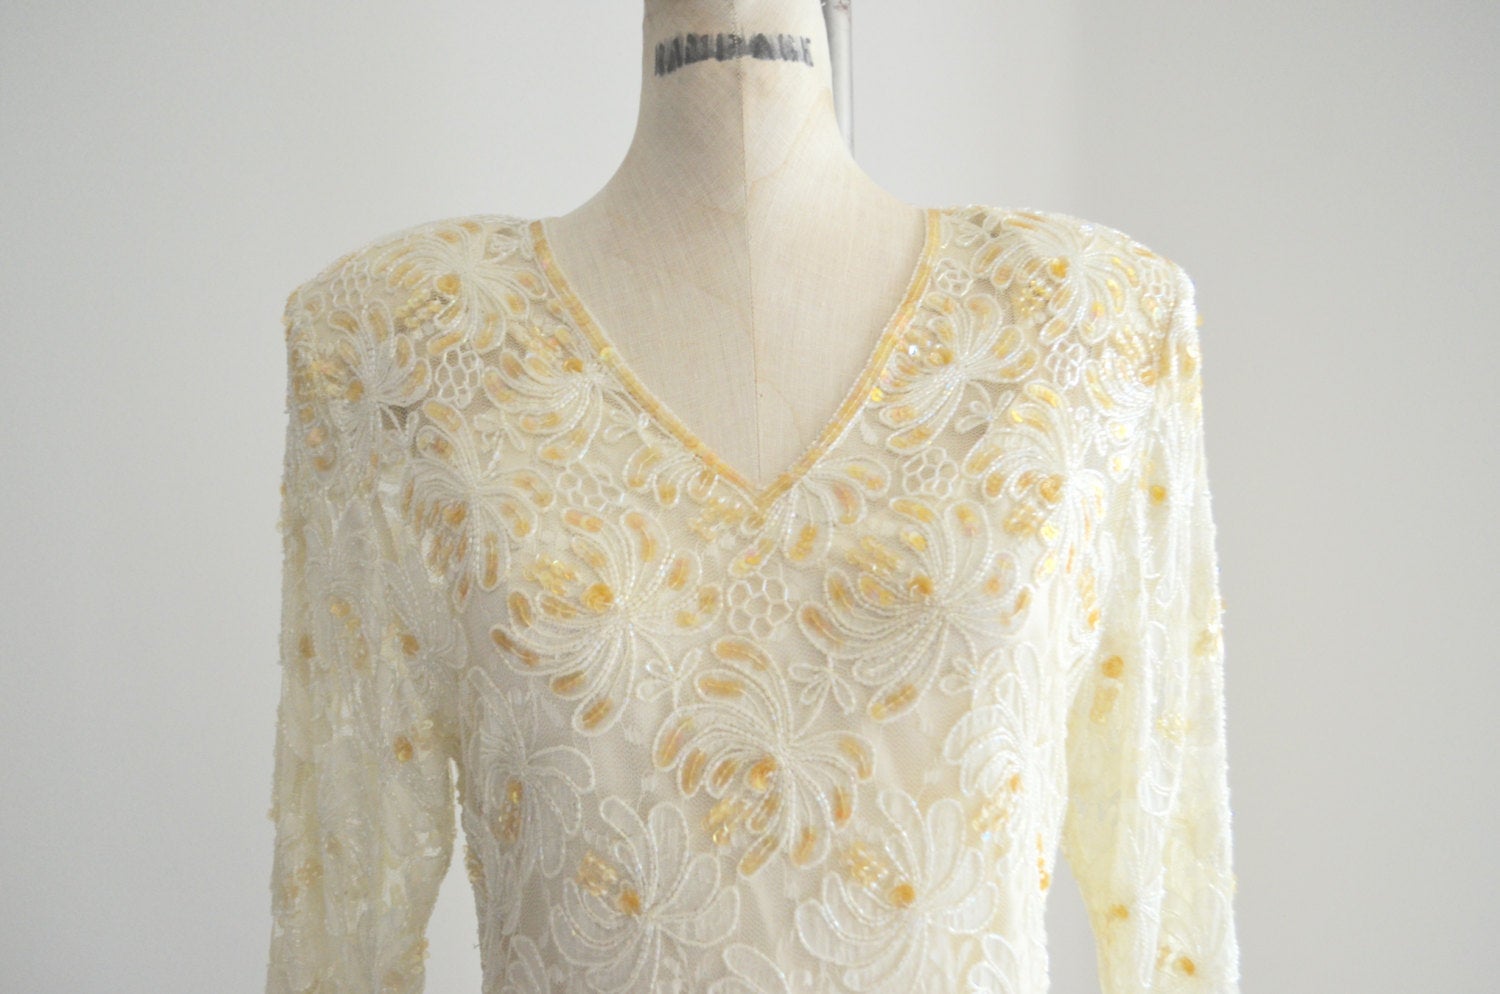 Off White Bohemian Bride Sequins And Floral Lace Wedding DressLong Sleeve Xs